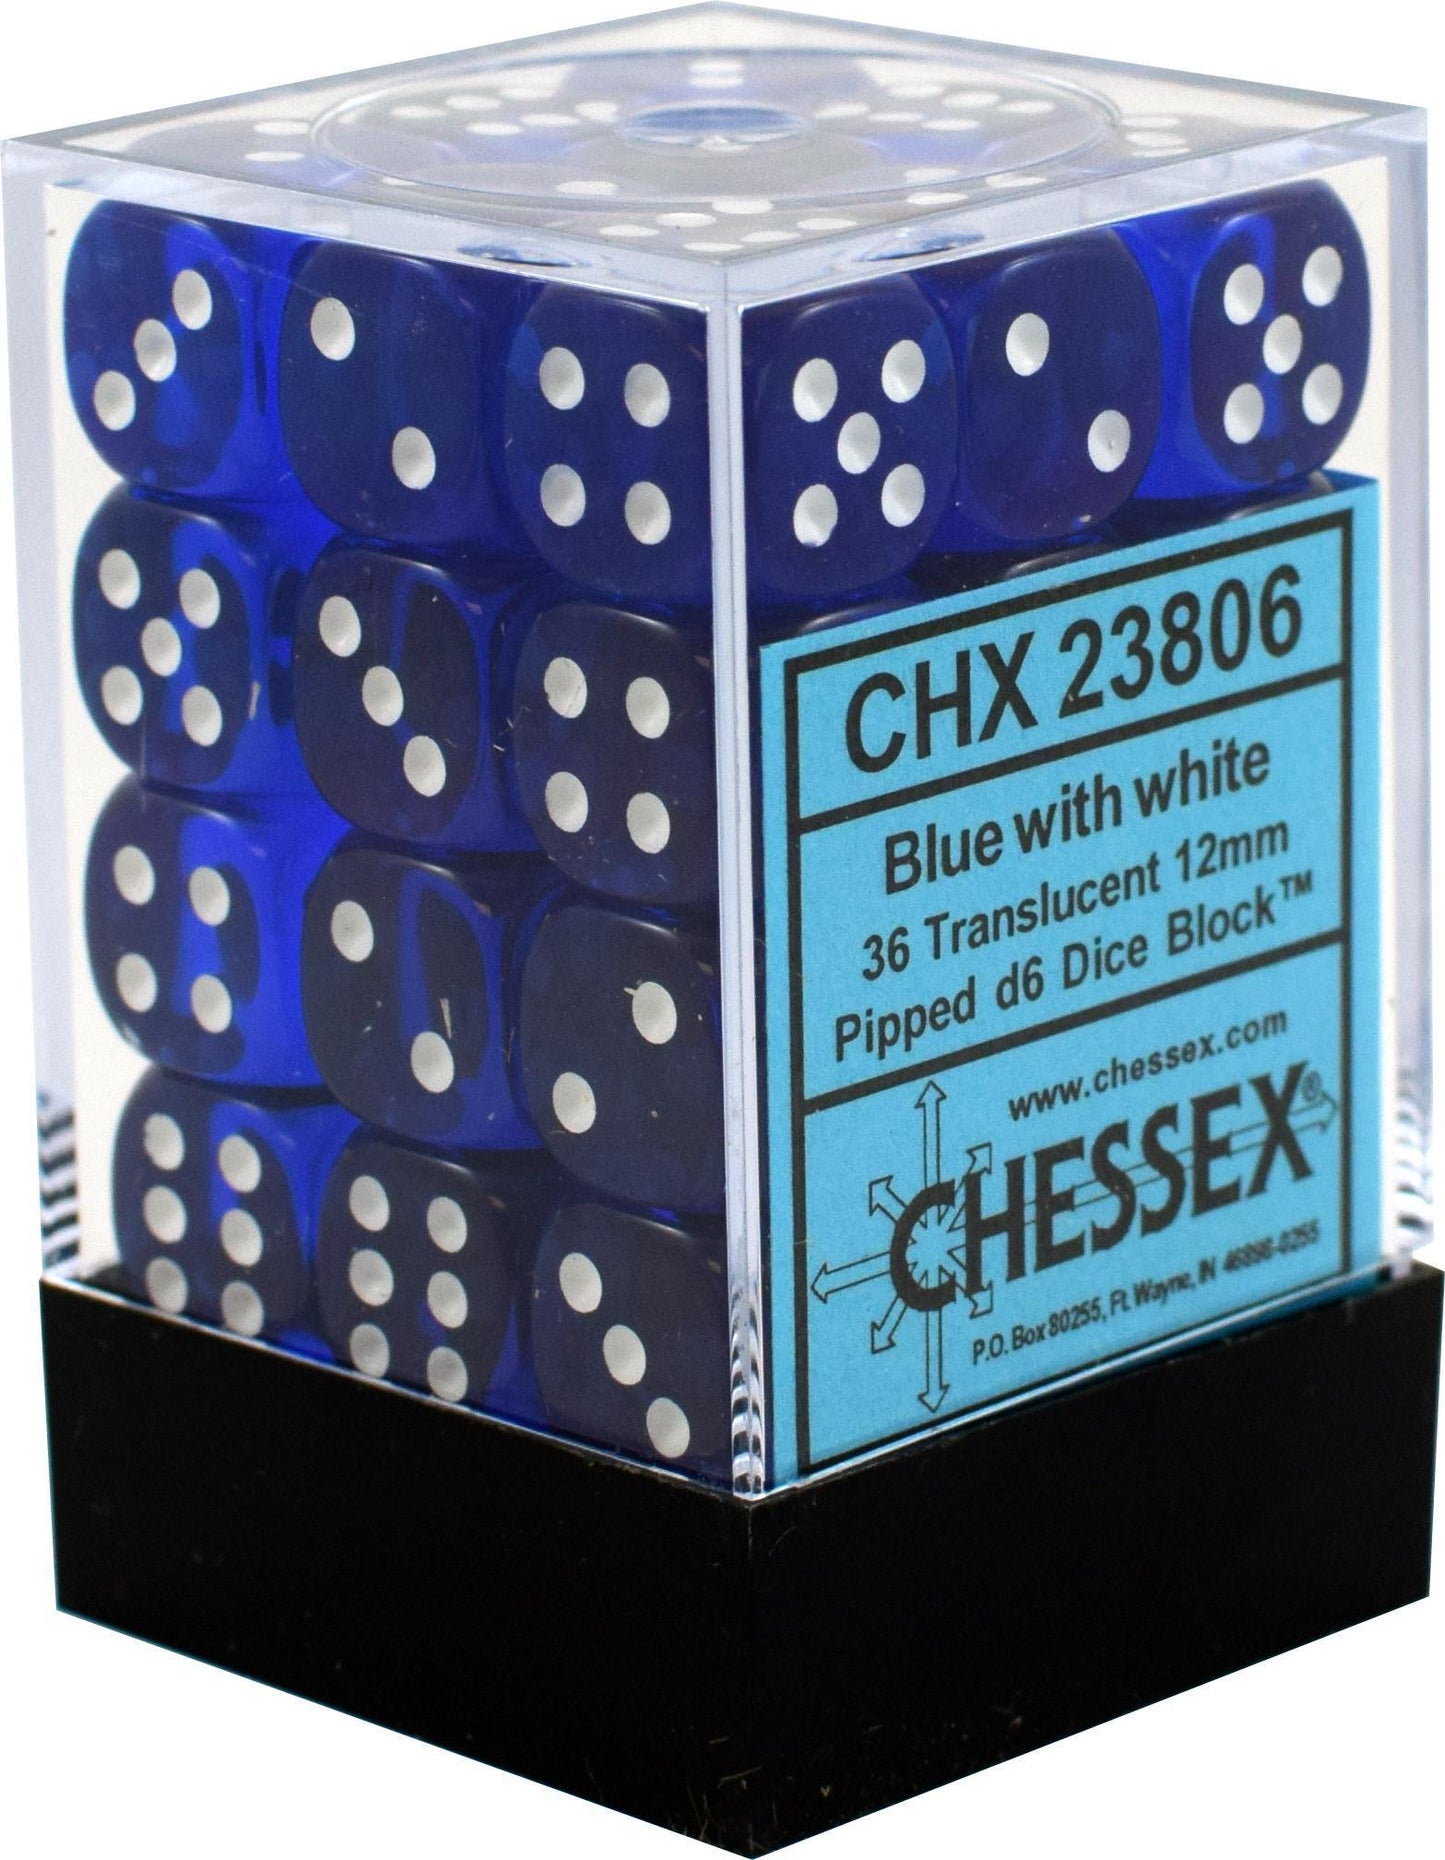 Chessex Dice: D6 Block 12mm - Translucent - Blue with White (CHX 23806) - Gamescape